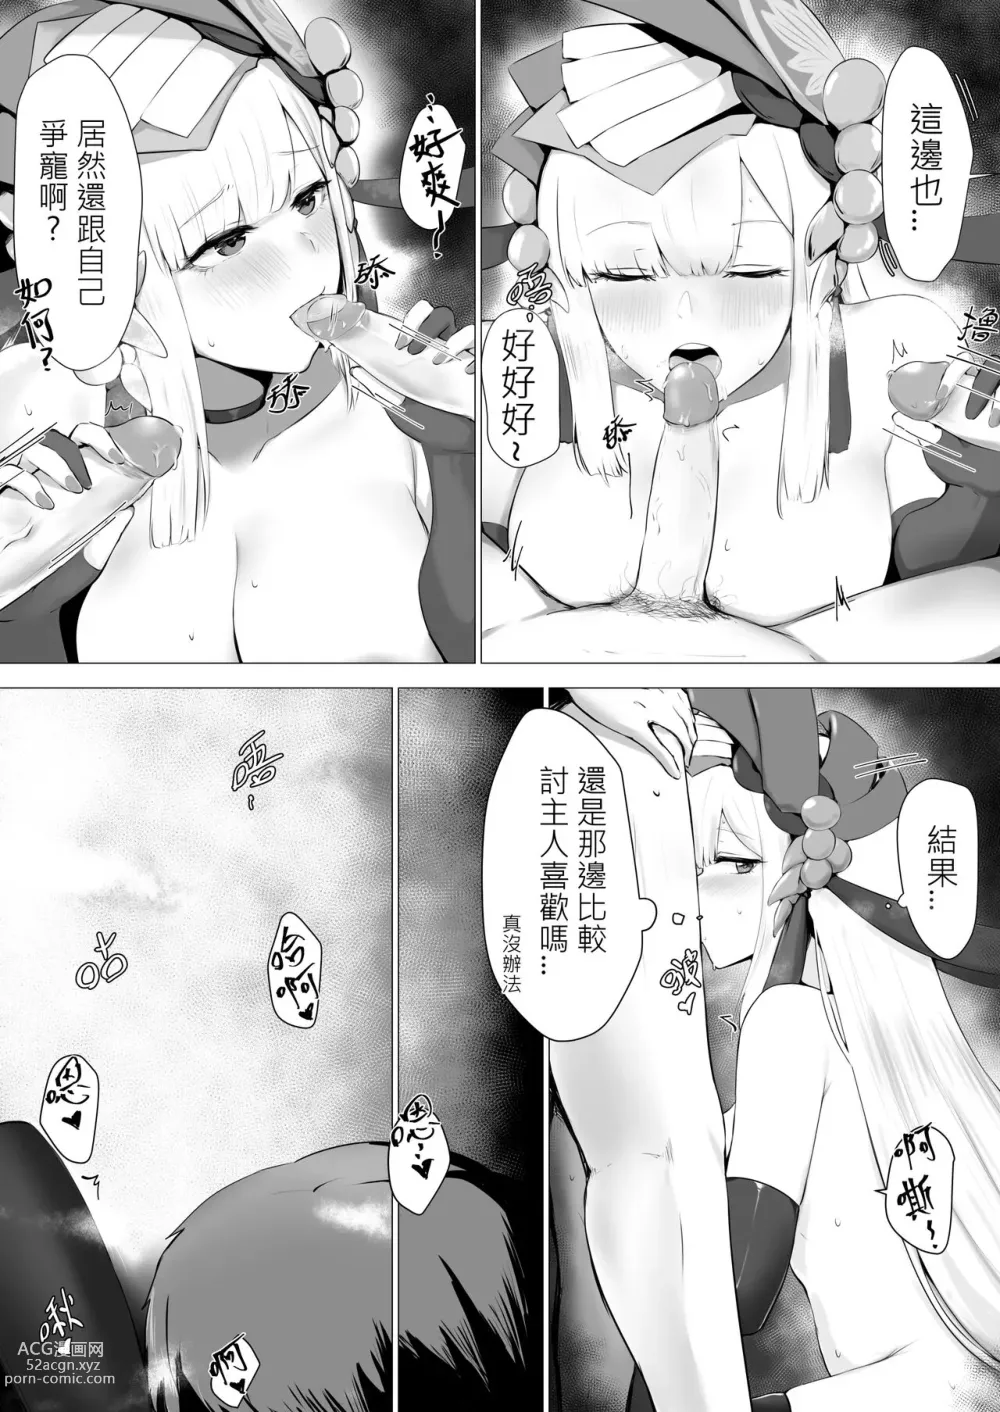 Page 3 of doujinshi 繪世妄想Part4